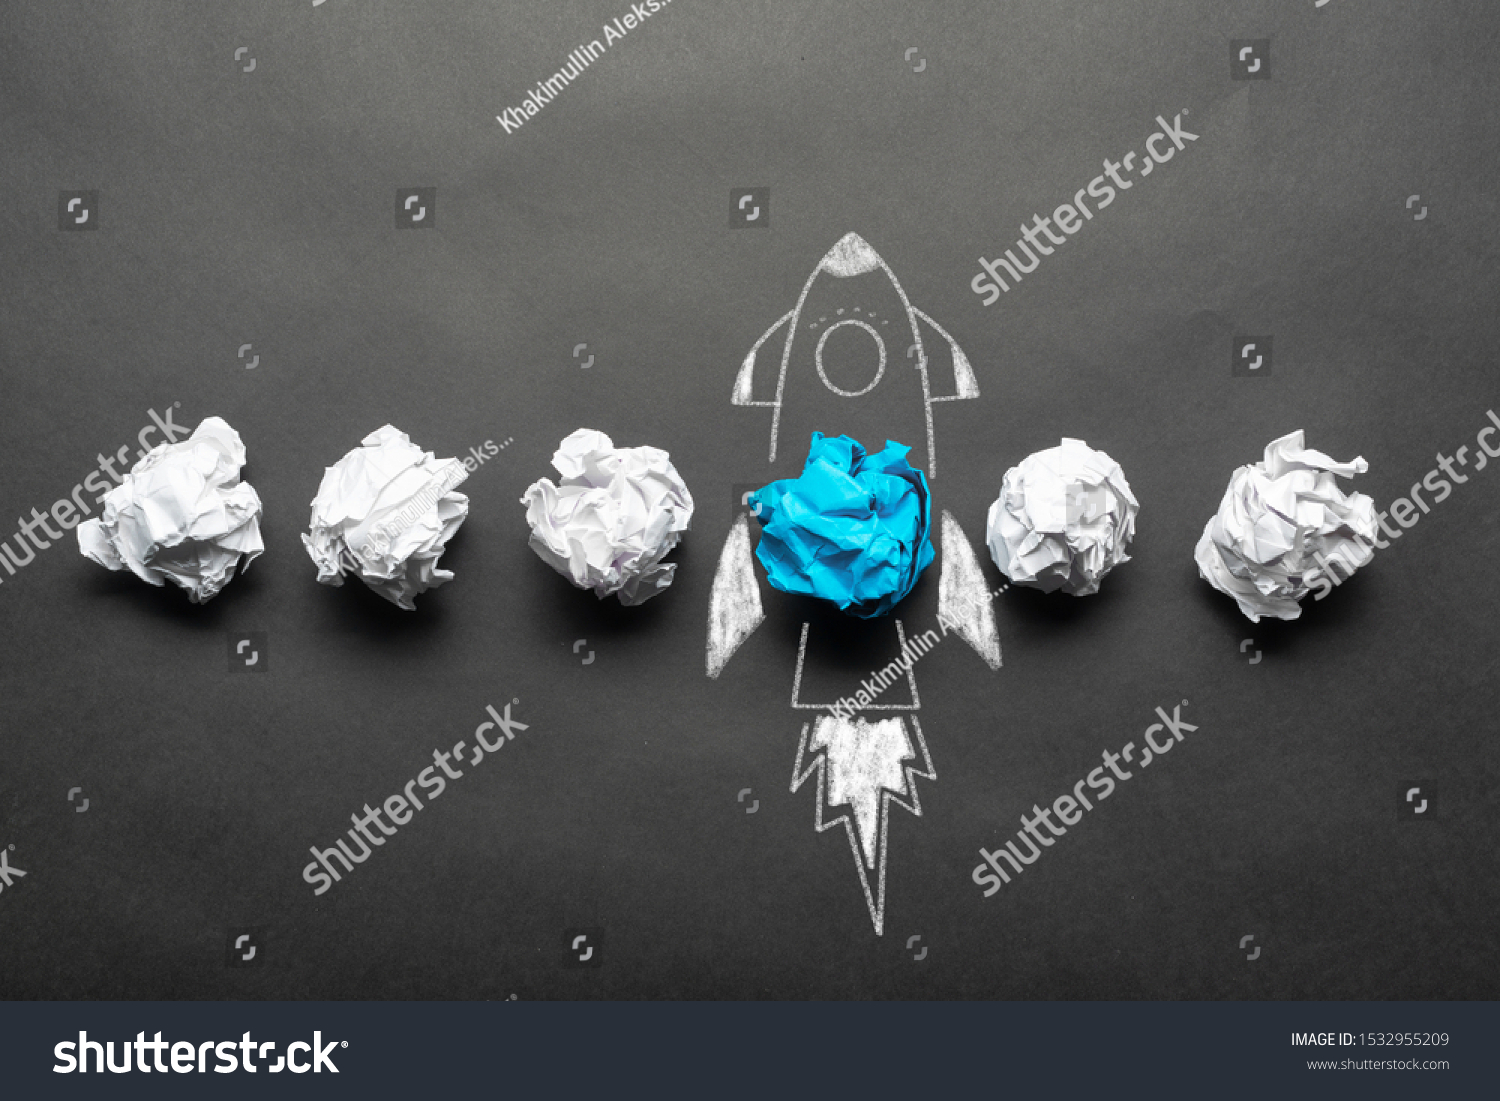 Rocket sketch drawing with crumpled blue paper ball on chalkboard. Successful business startup. Creative motivation with copy space. Unique business idea among failing ideas metaphor. #1532955209